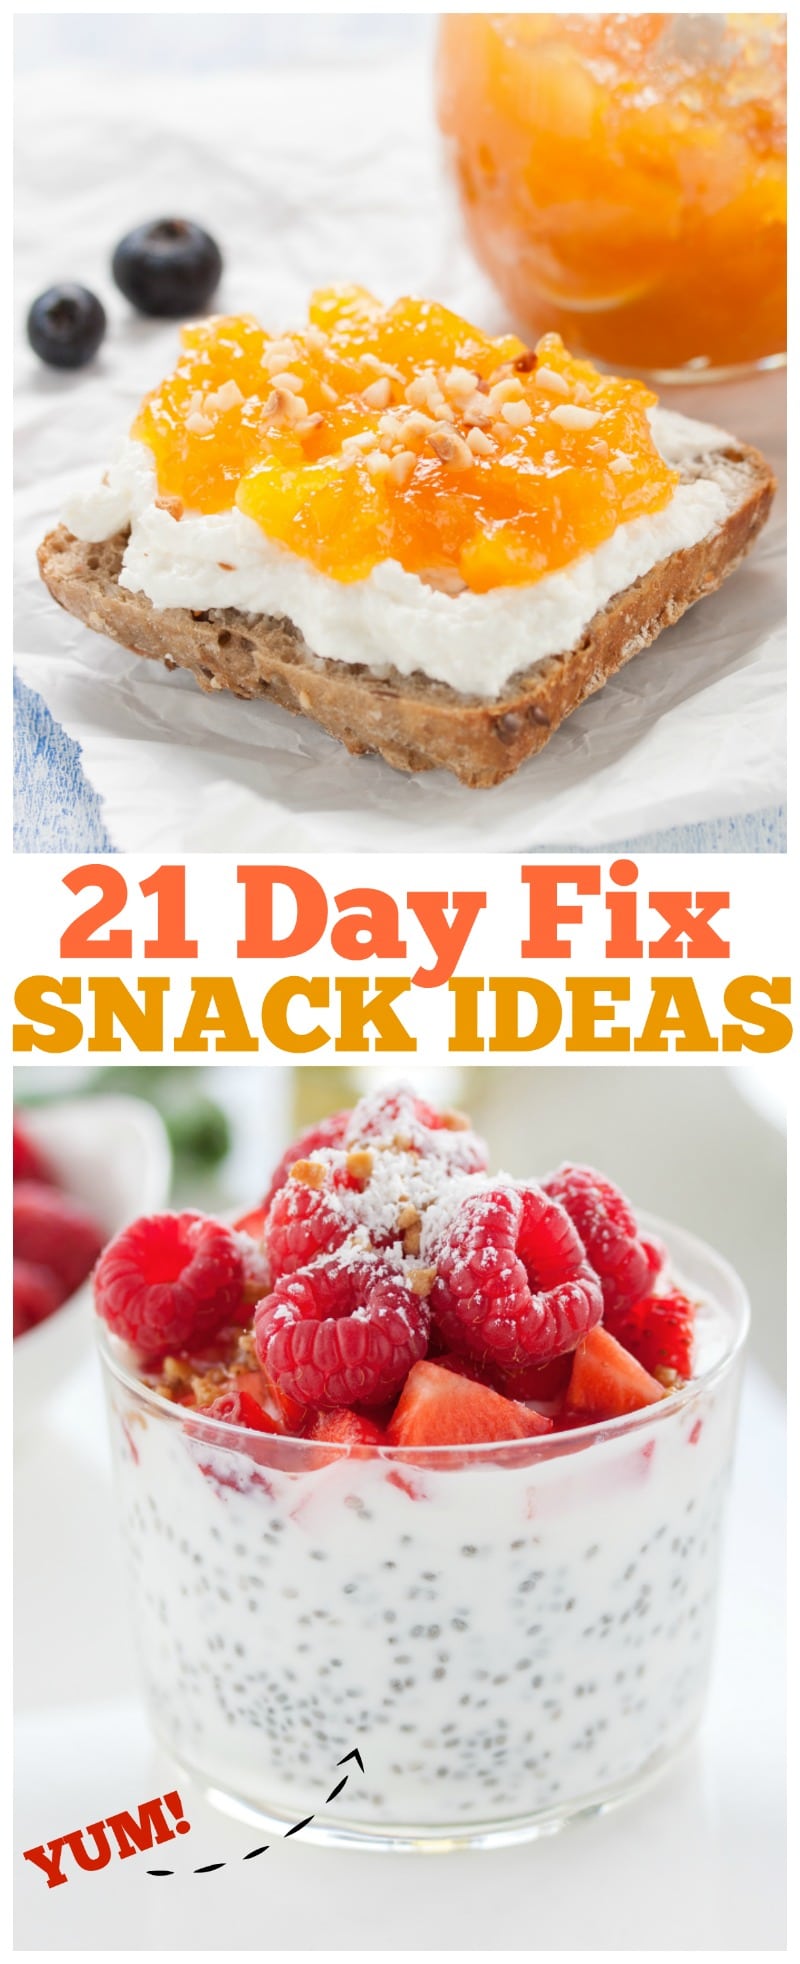 21-Day Fix Snack Recipes, Get a snack for Every work day of the month with these 20 21-day fix recipe ideas